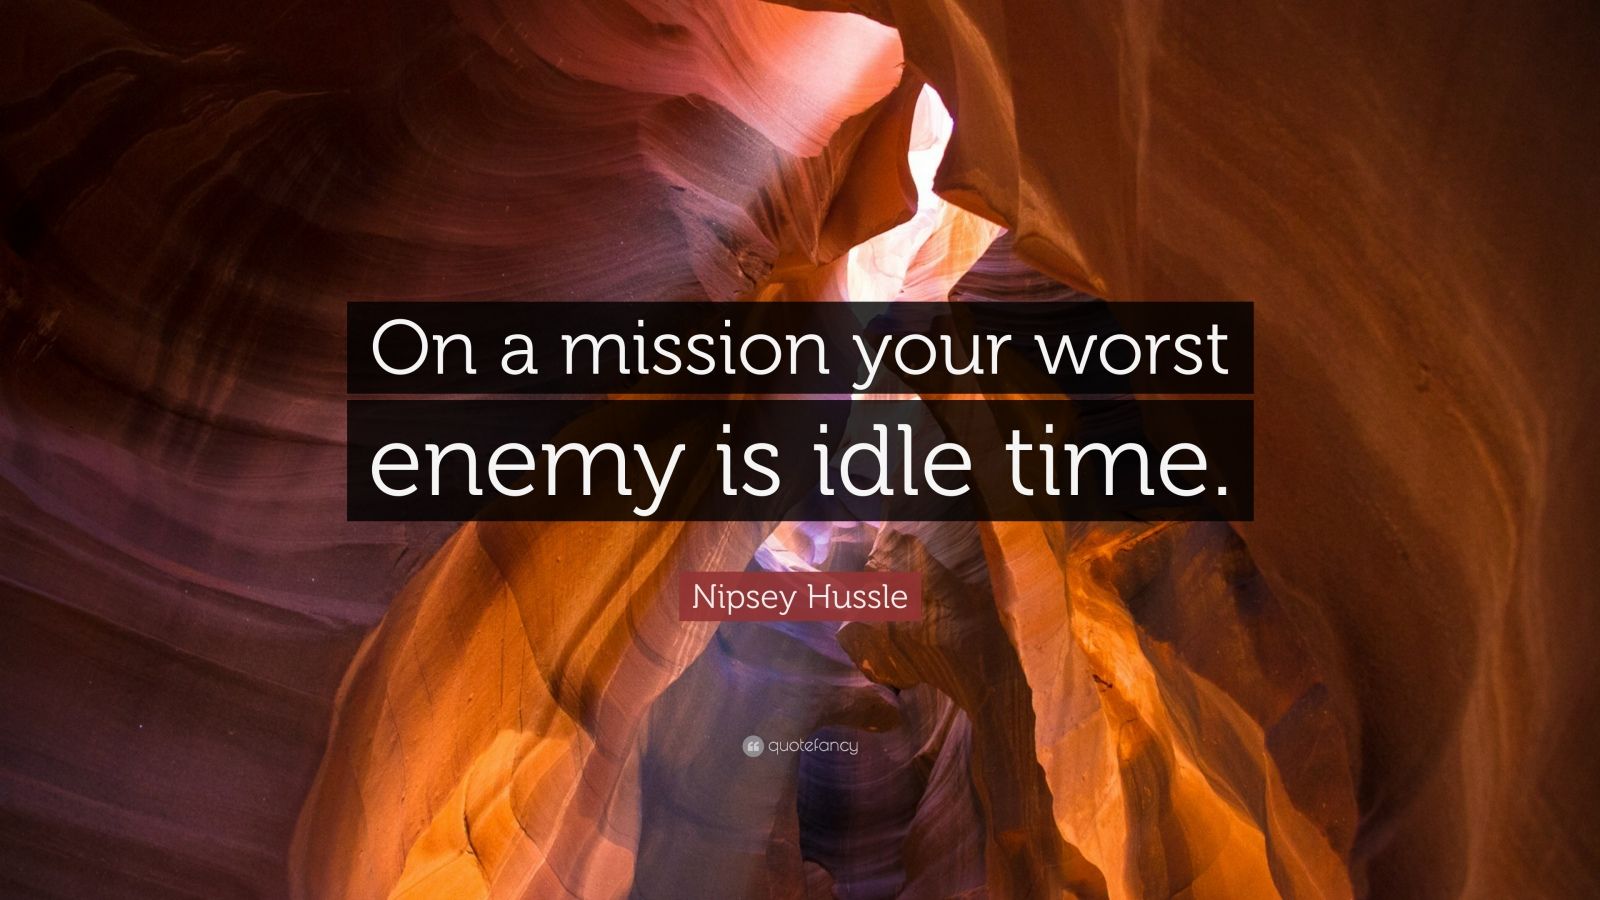 1883823 Nipsey Hussle Quote On a mission your worst enemy is idle time